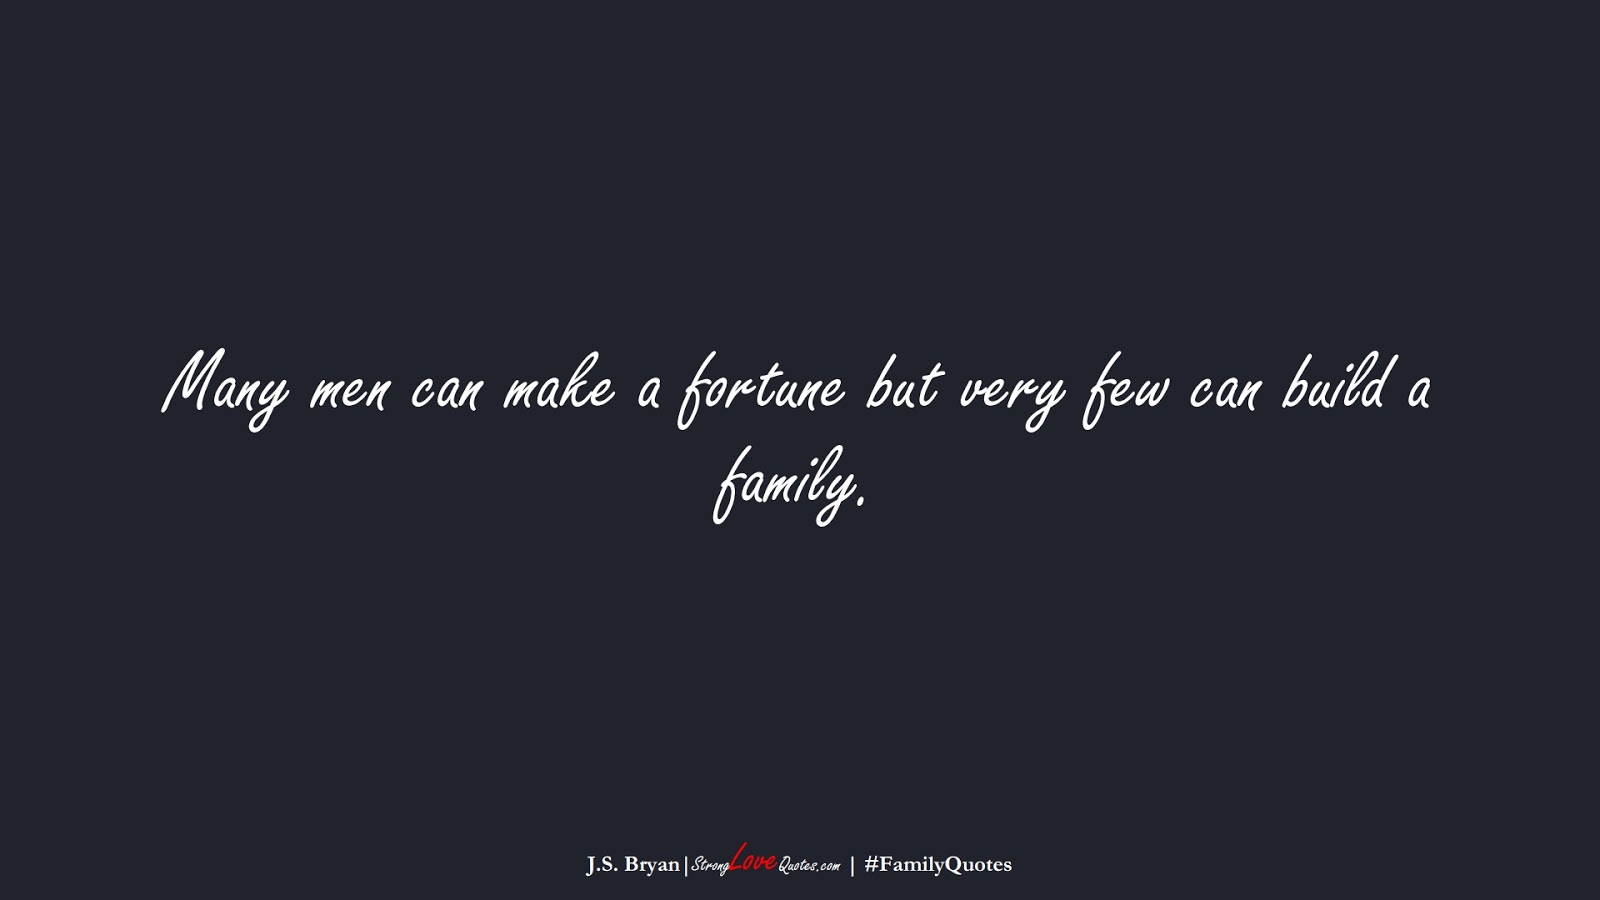 Many men can make a fortune but very few can build a family. (J.S. Bryan);  #FamilyQuotes